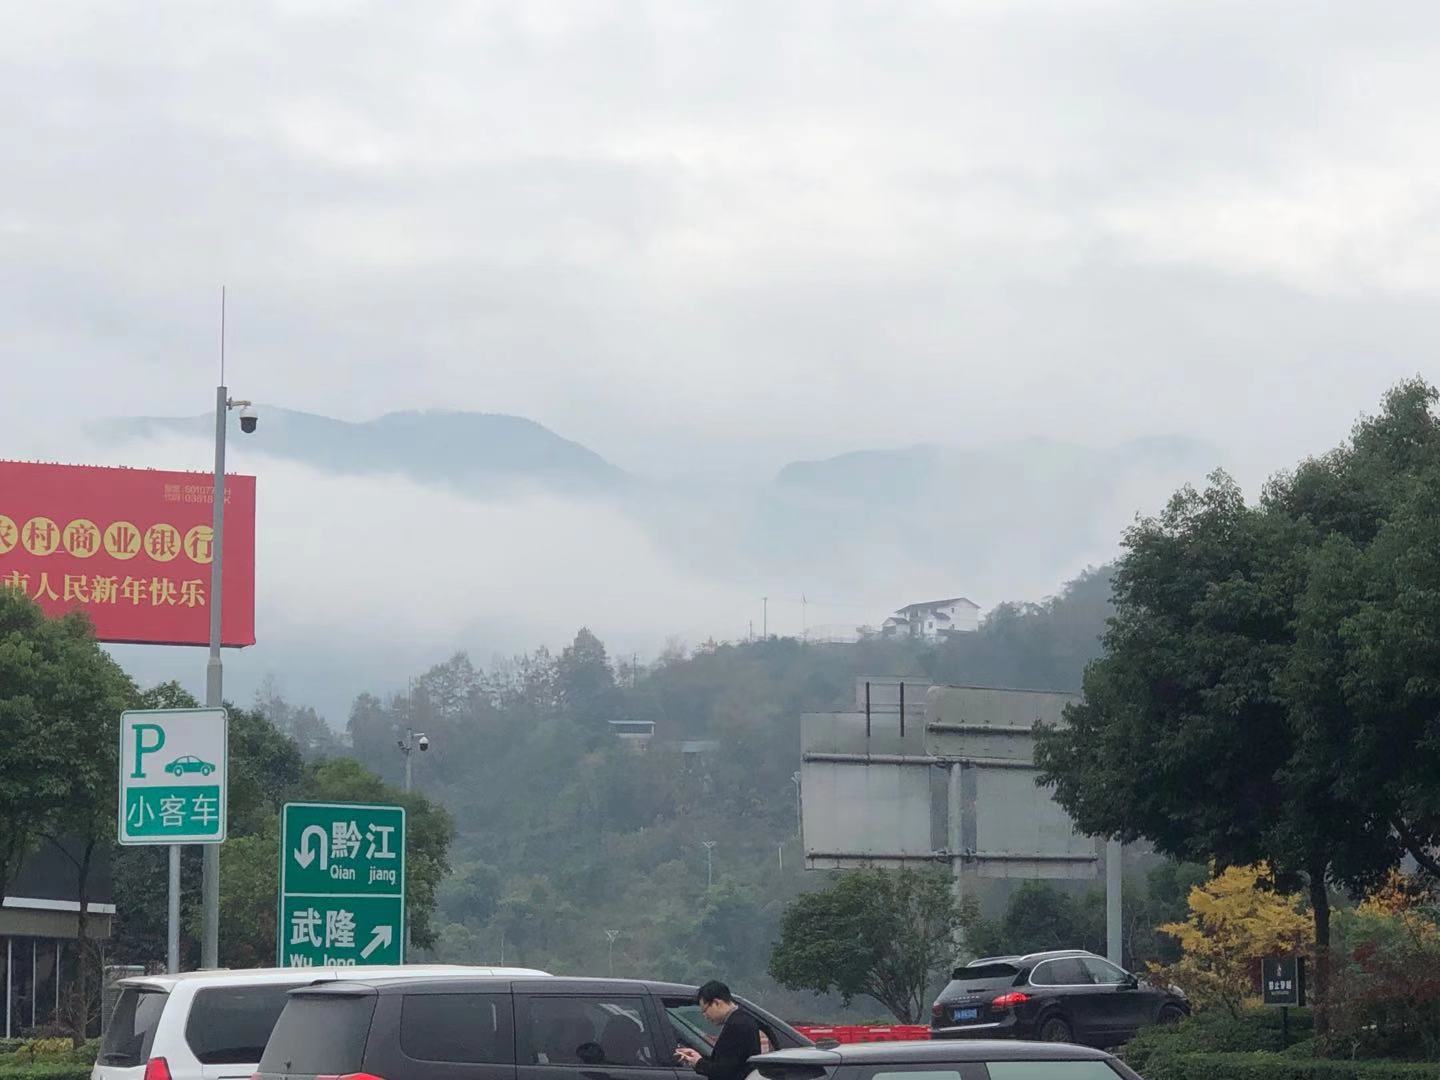 Driving with the family to Wulong Mountain, the stunning fog capped horizon calls to us.